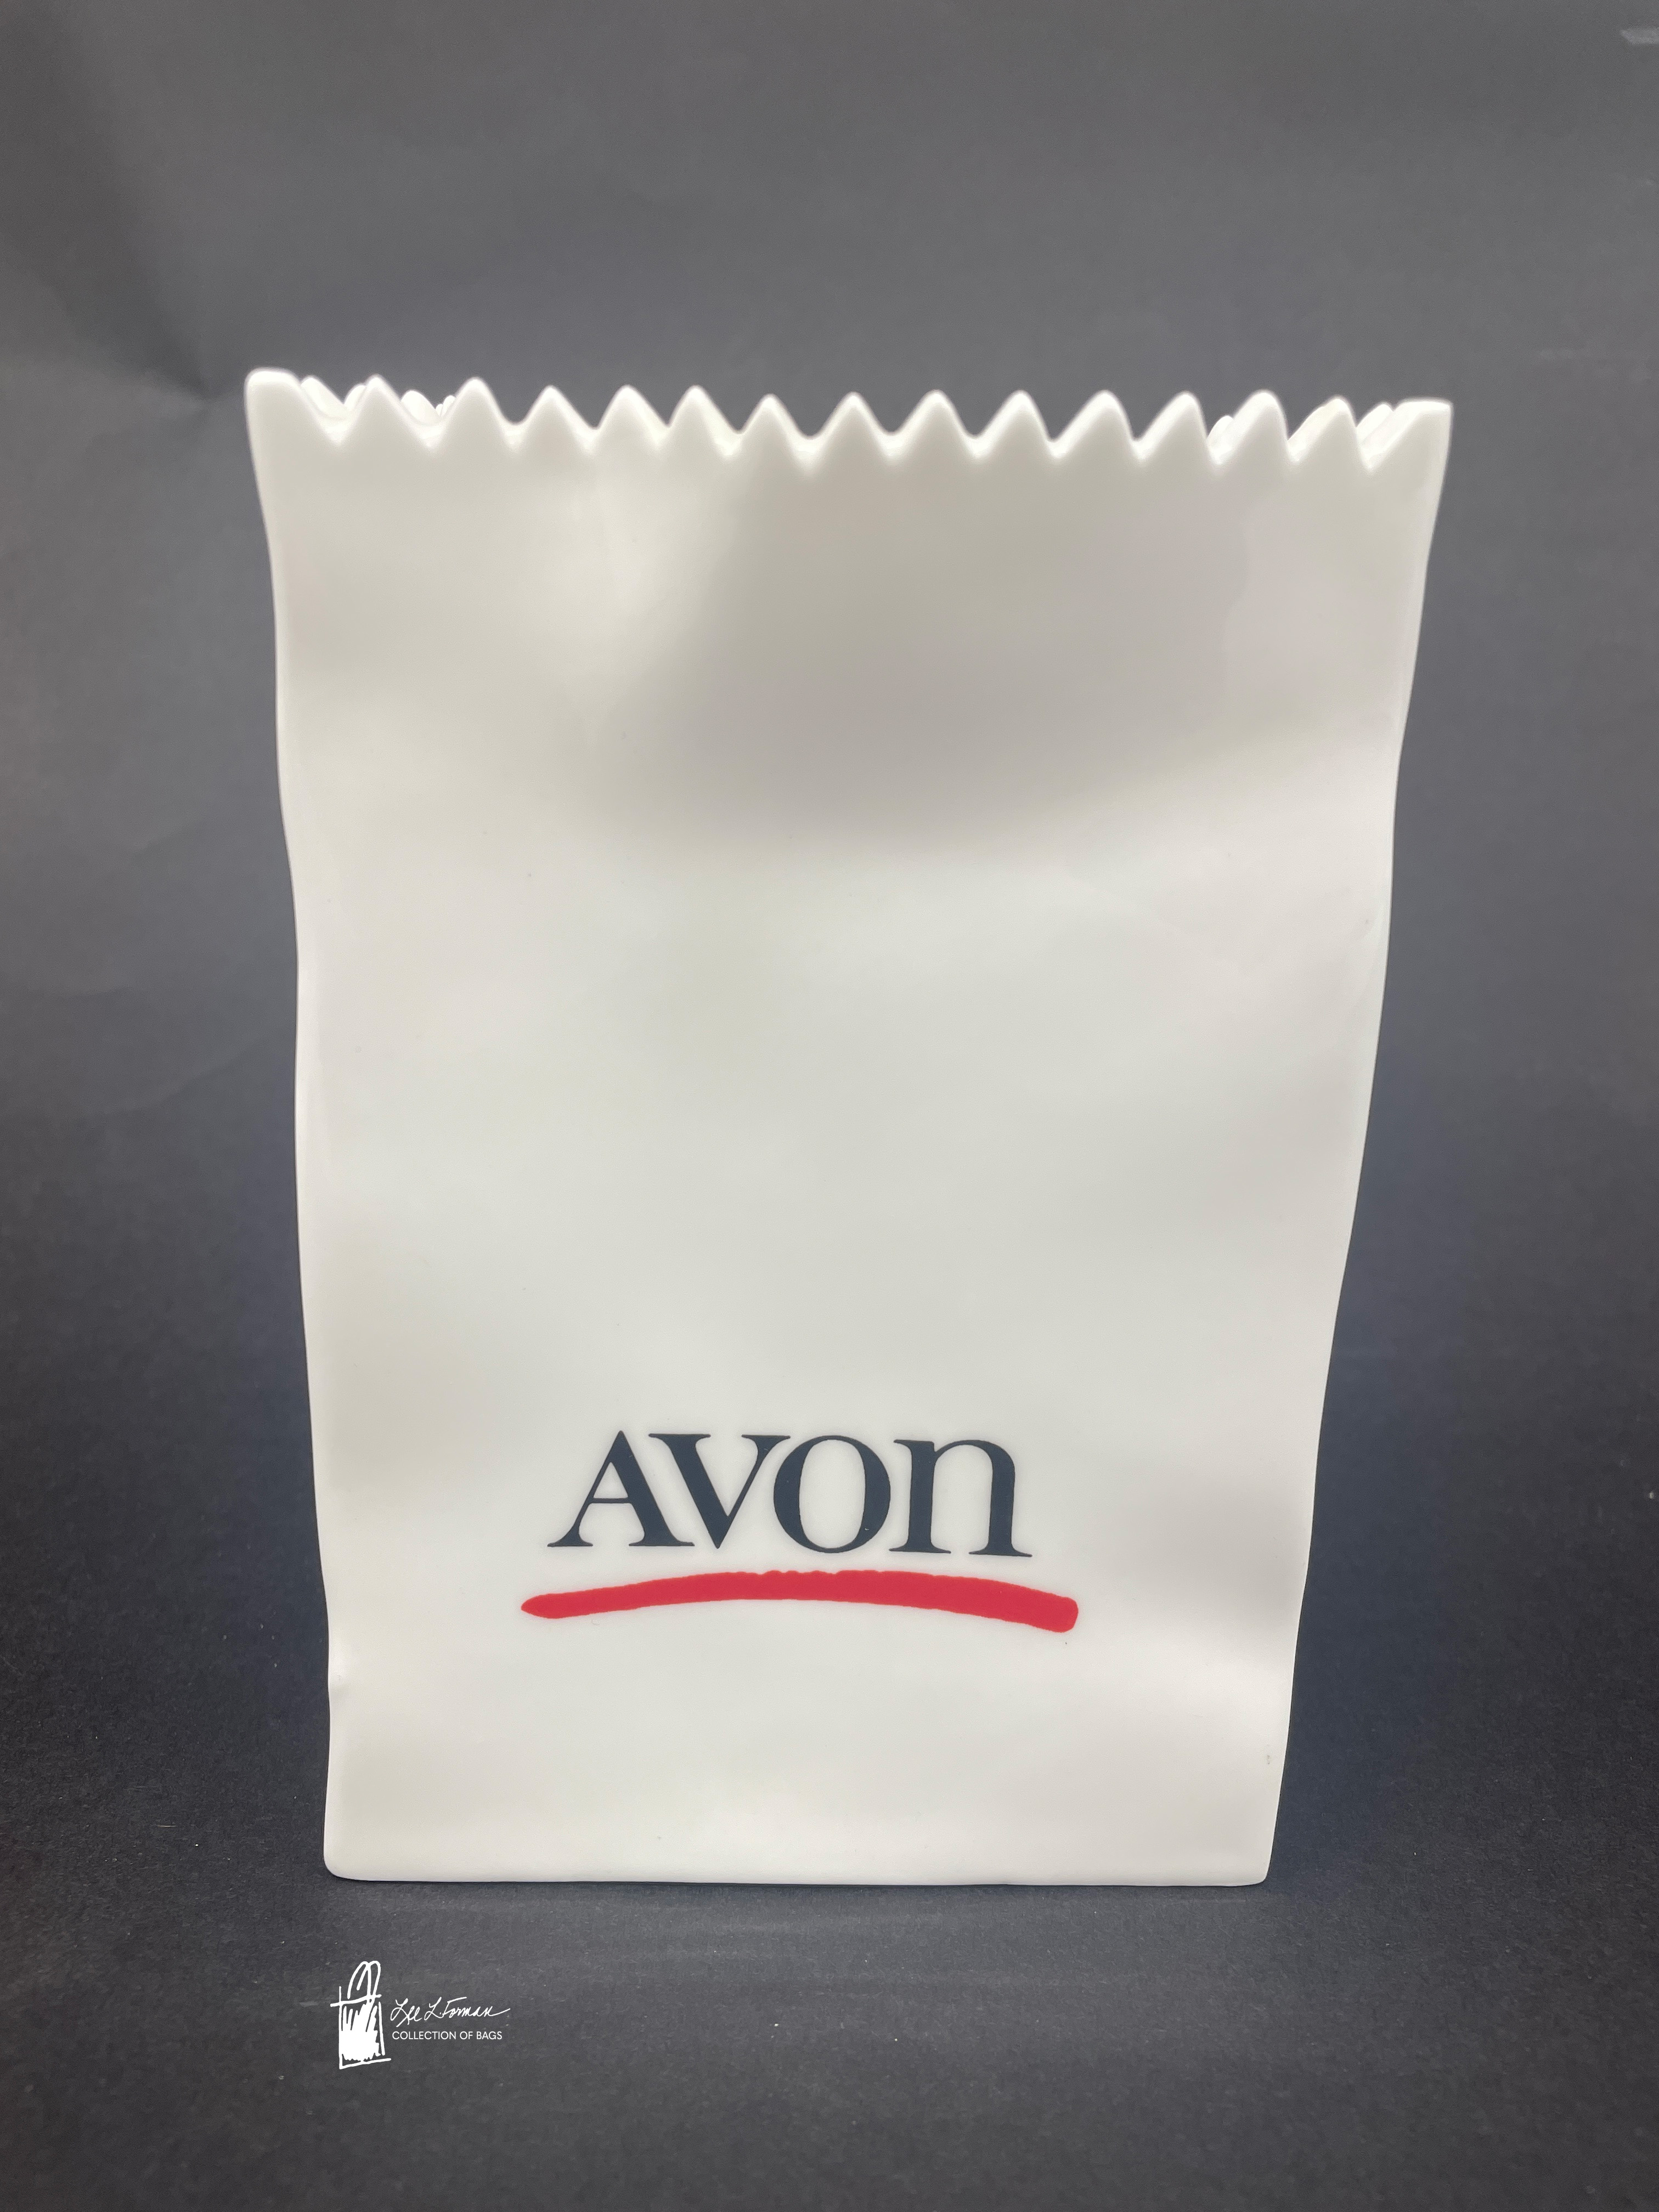 24/365: The American-founded cosmetics company, Avon, sells products in more than 100 countries. International markets surpassed US sales in 2010, with Brazil currently serving as the company's largest market.